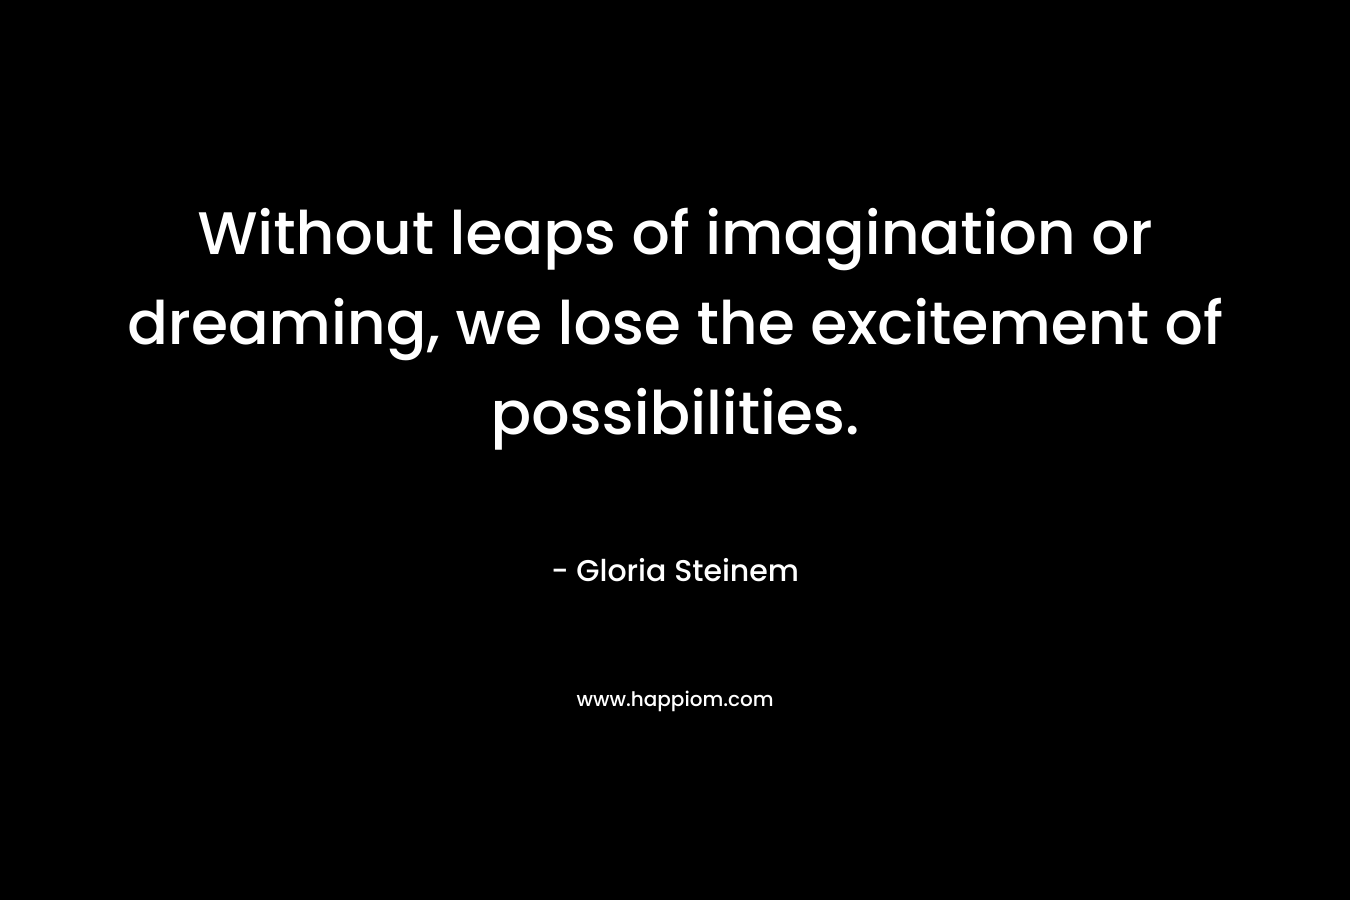 Without leaps of imagination or dreaming, we lose the excitement of possibilities. – Gloria Steinem